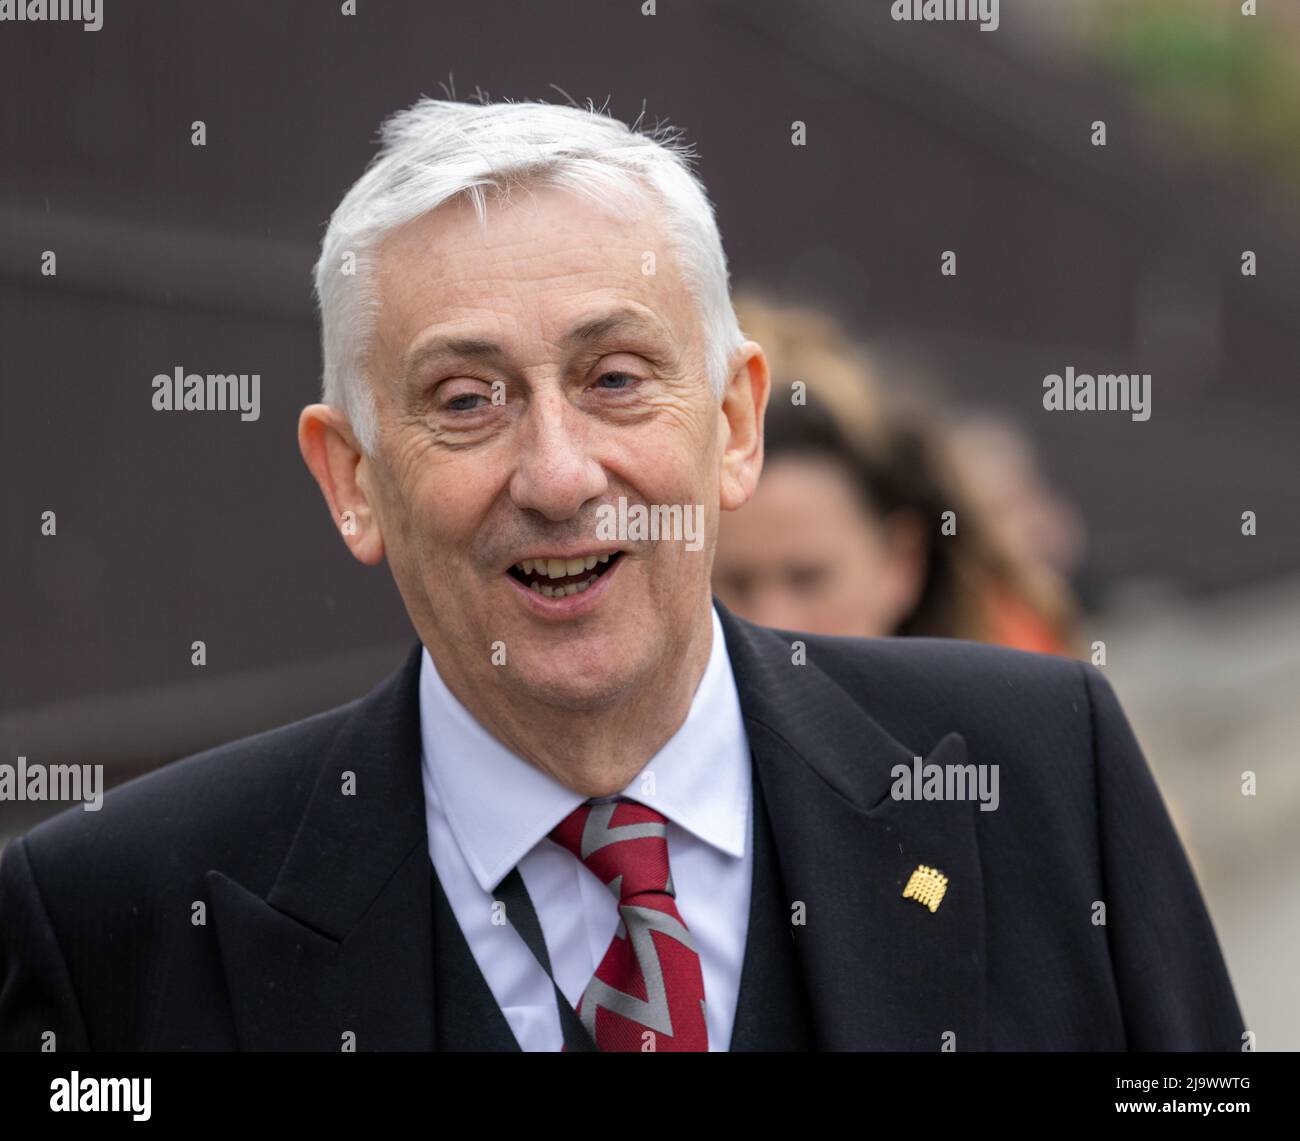 London, UK. 25th May, 2022. MP's outside the House of Commons on the day the Partygate report release Pictured Lindsay Hoyle MP for Chorley and Speaker of the House of Commons Credit: Ian Davidson/Alamy Live News Stock Photo